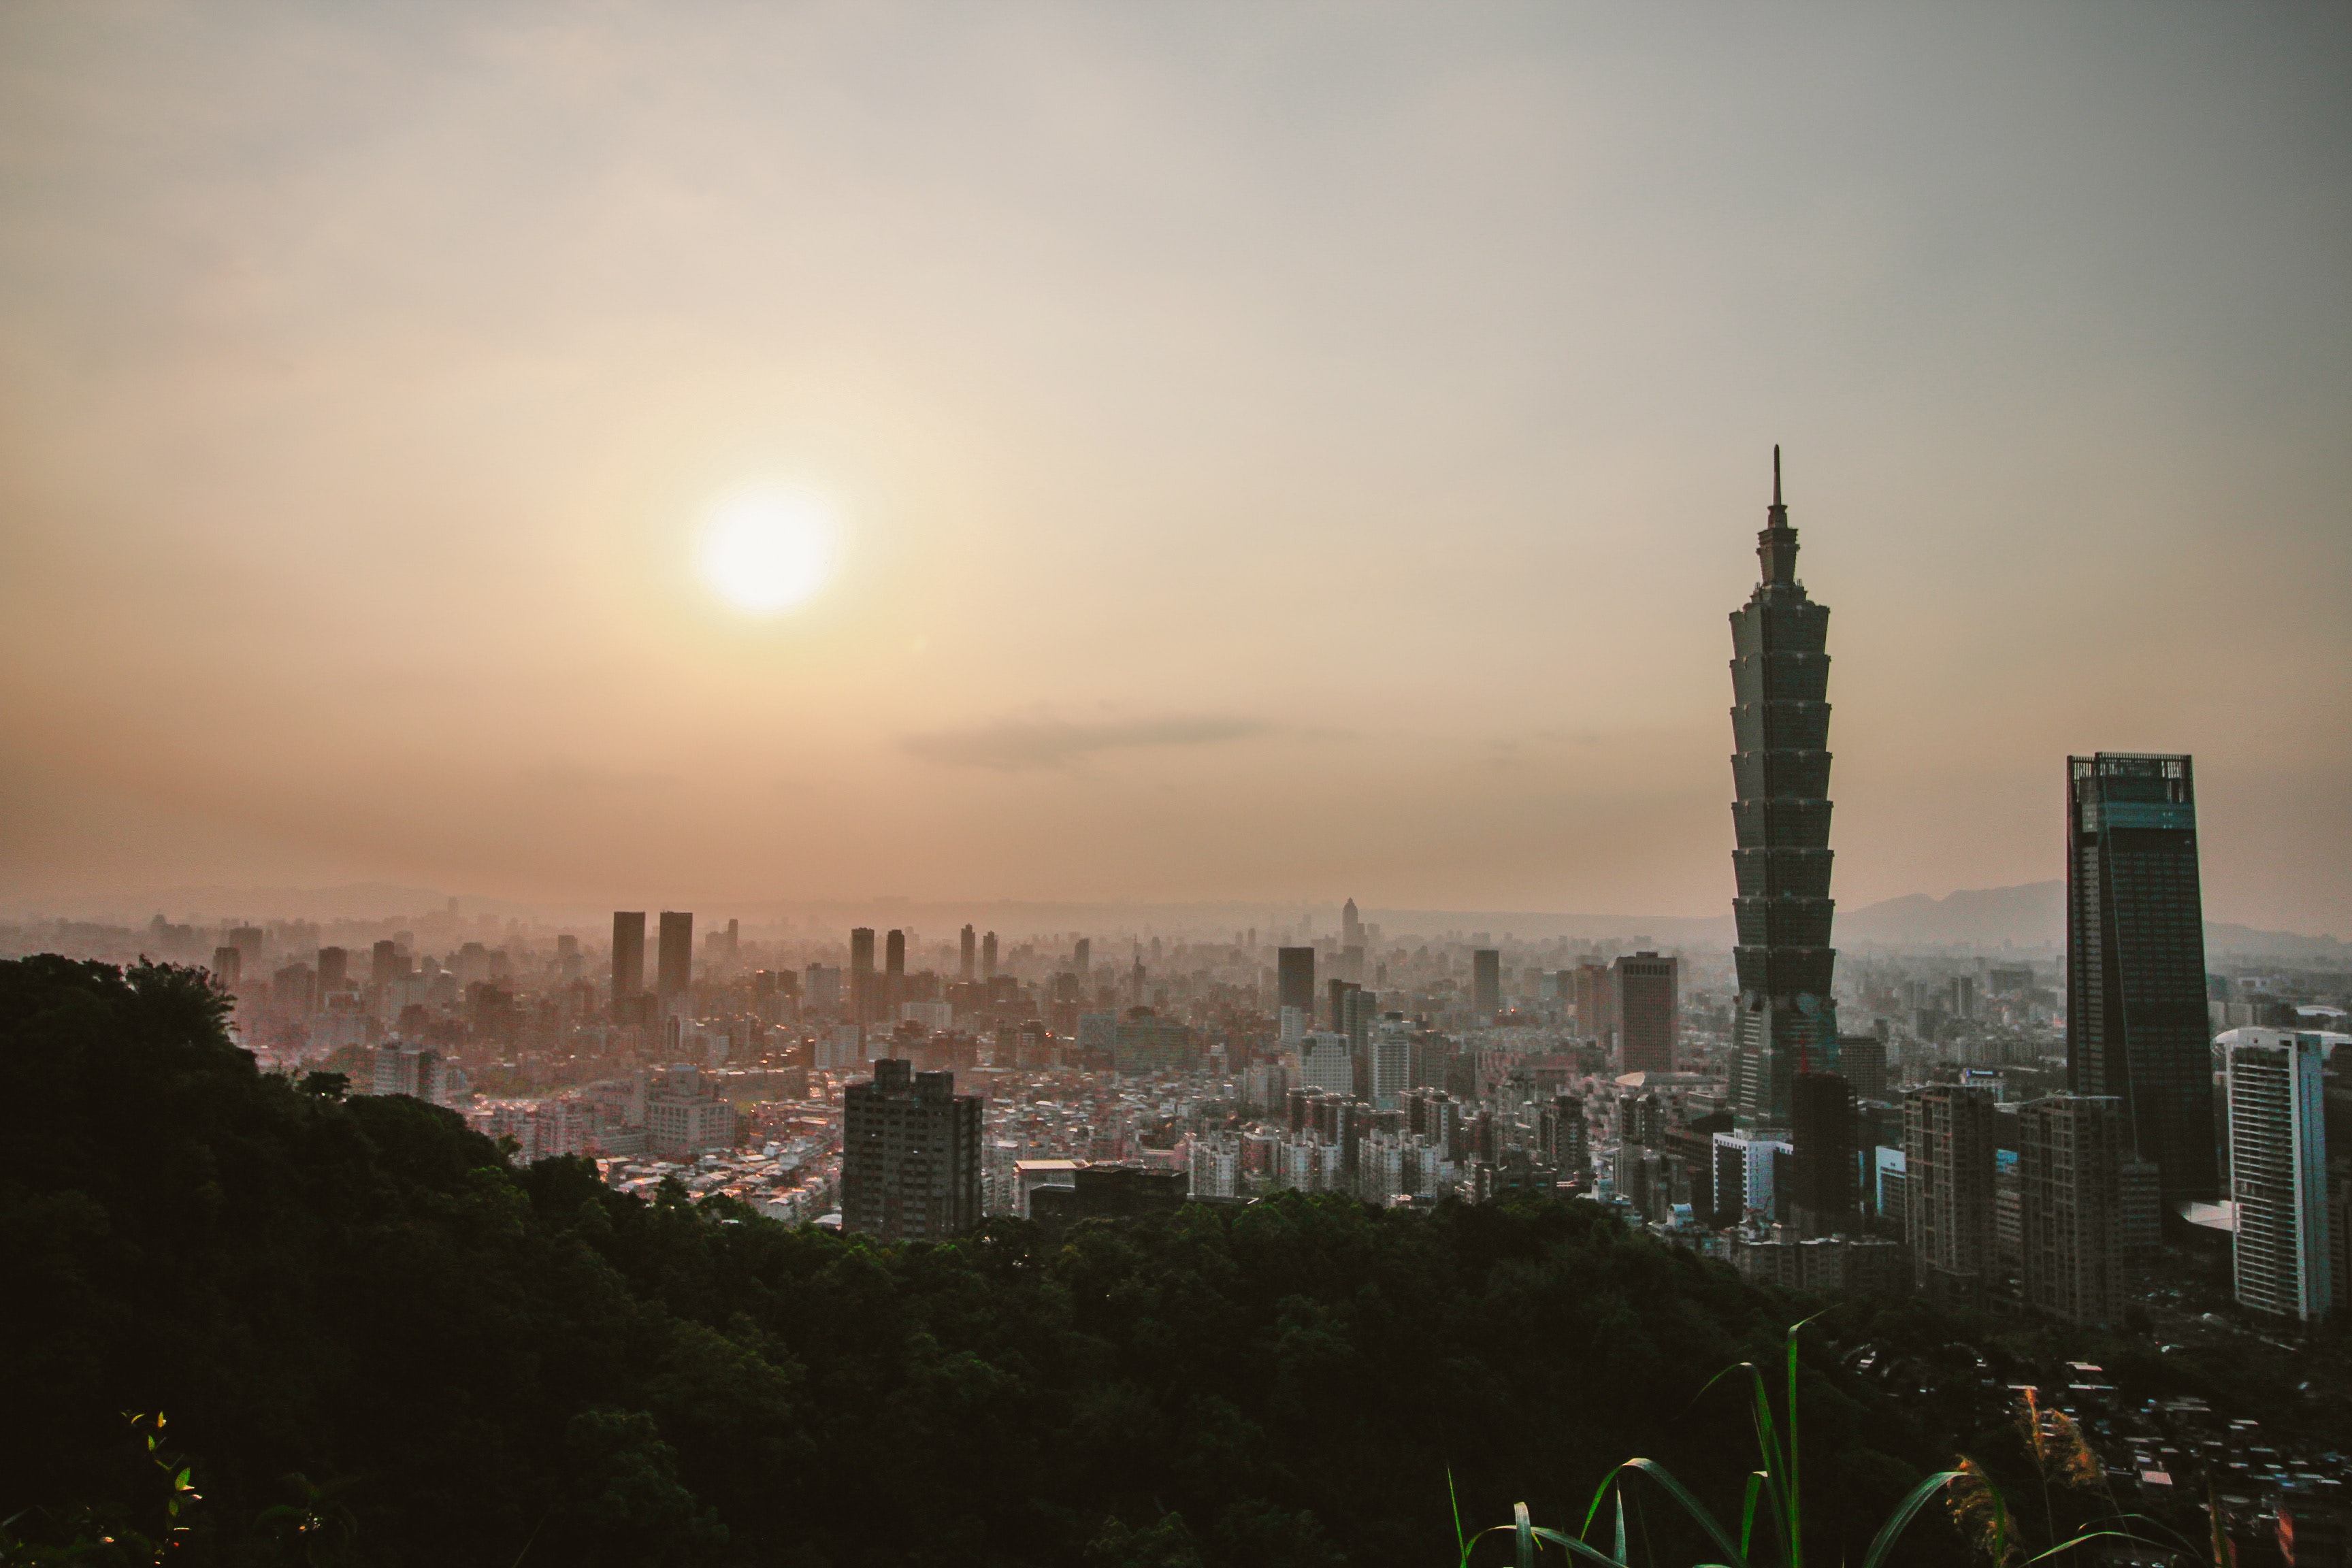 Empire State Building during Night Time, Outdoors, Towers, Taiwan, Sunset, HQ Photo